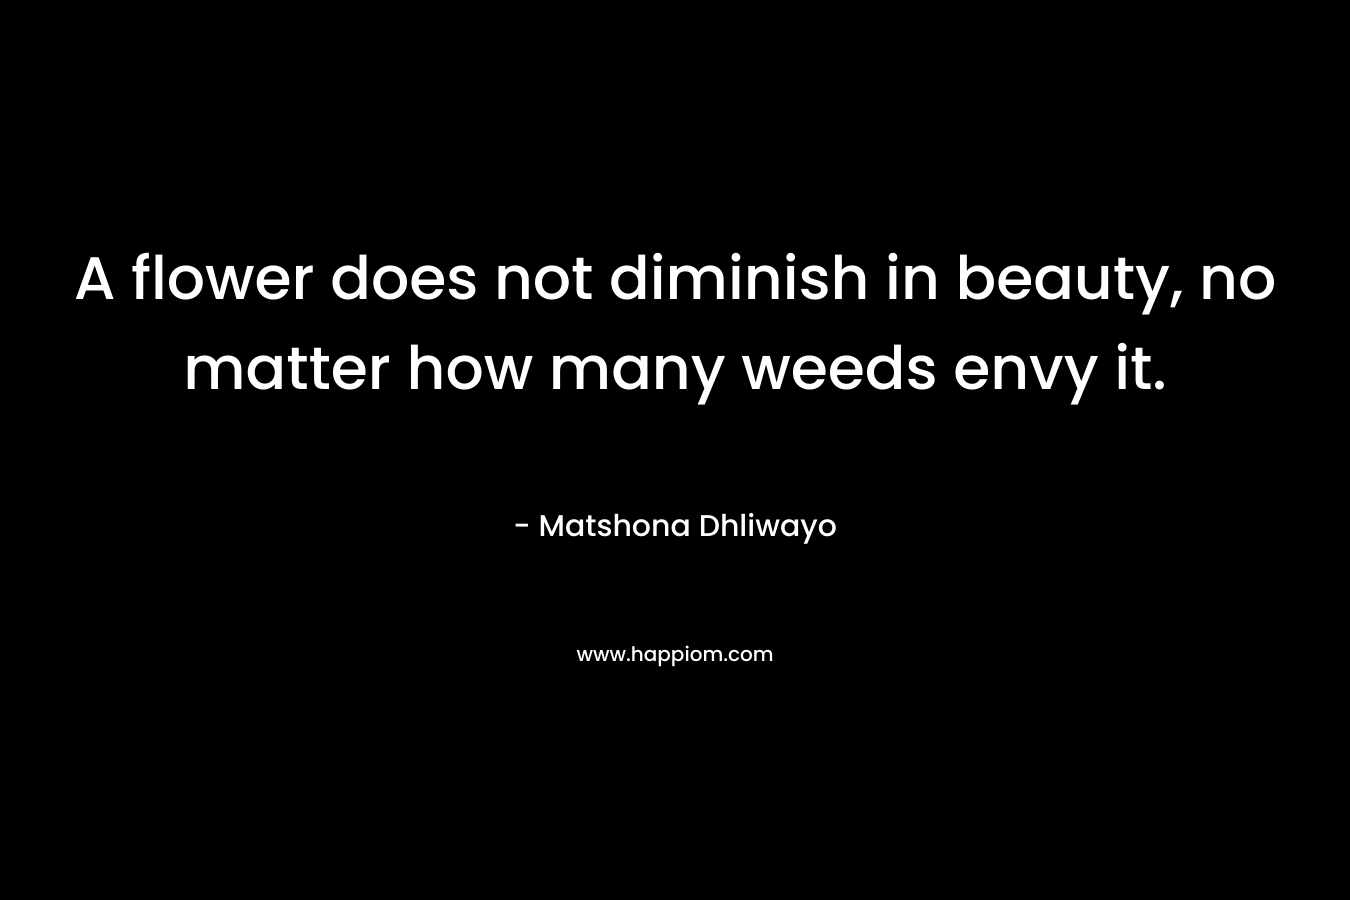 A flower does not diminish in beauty, no matter how many weeds envy it. – Matshona Dhliwayo